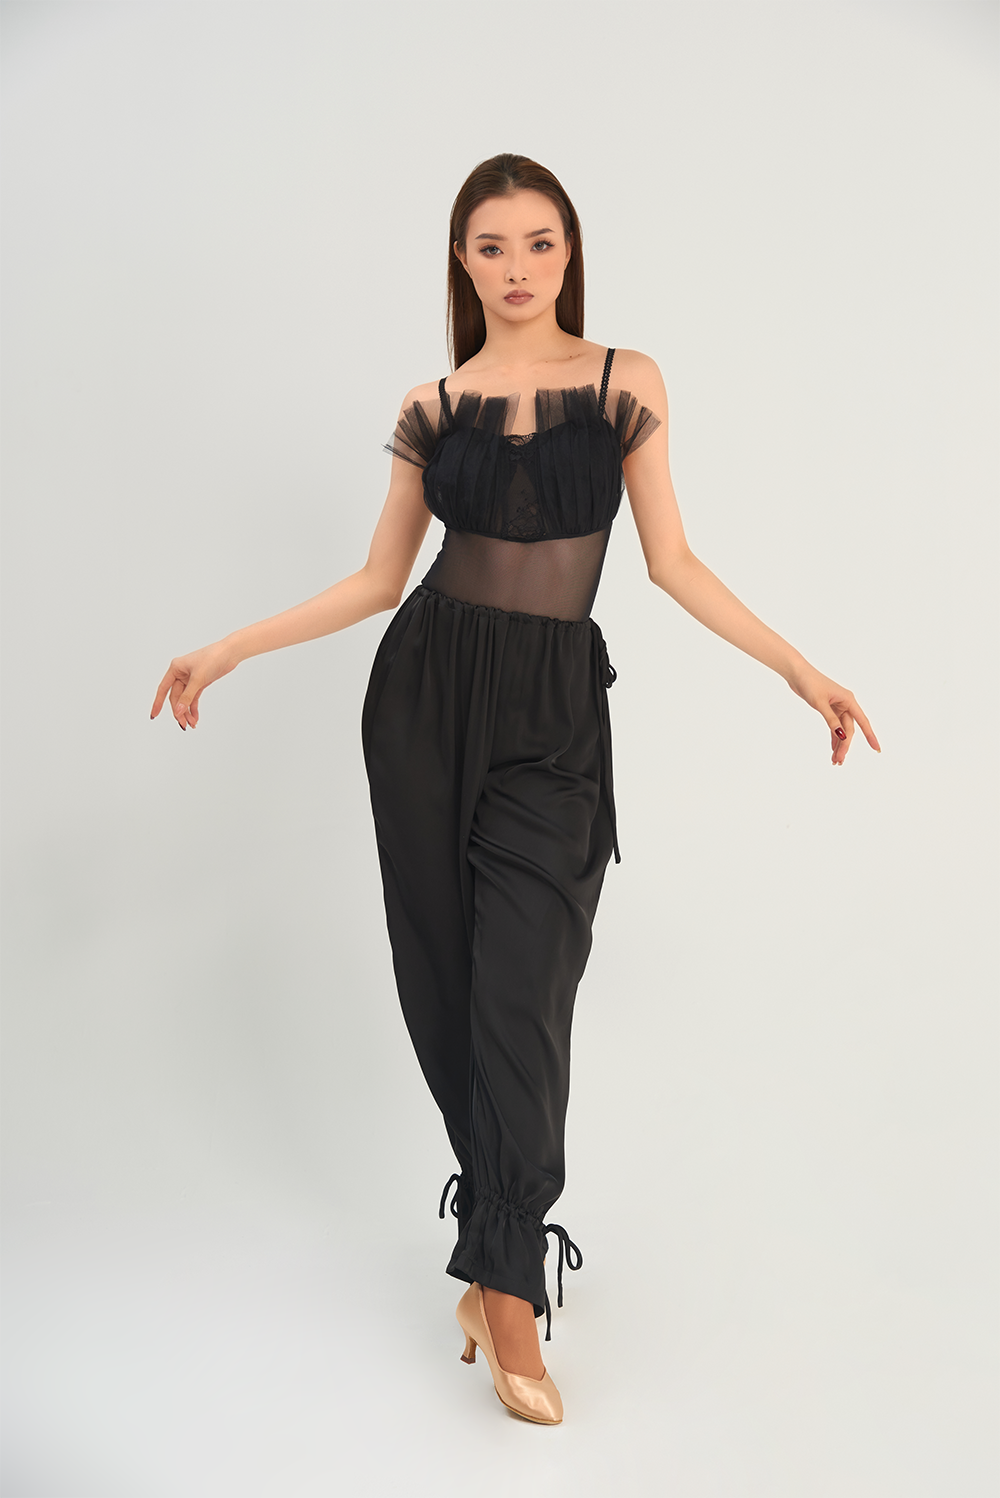 DANCE QUEEN W19 Drawstring Ankle Strap Trousers